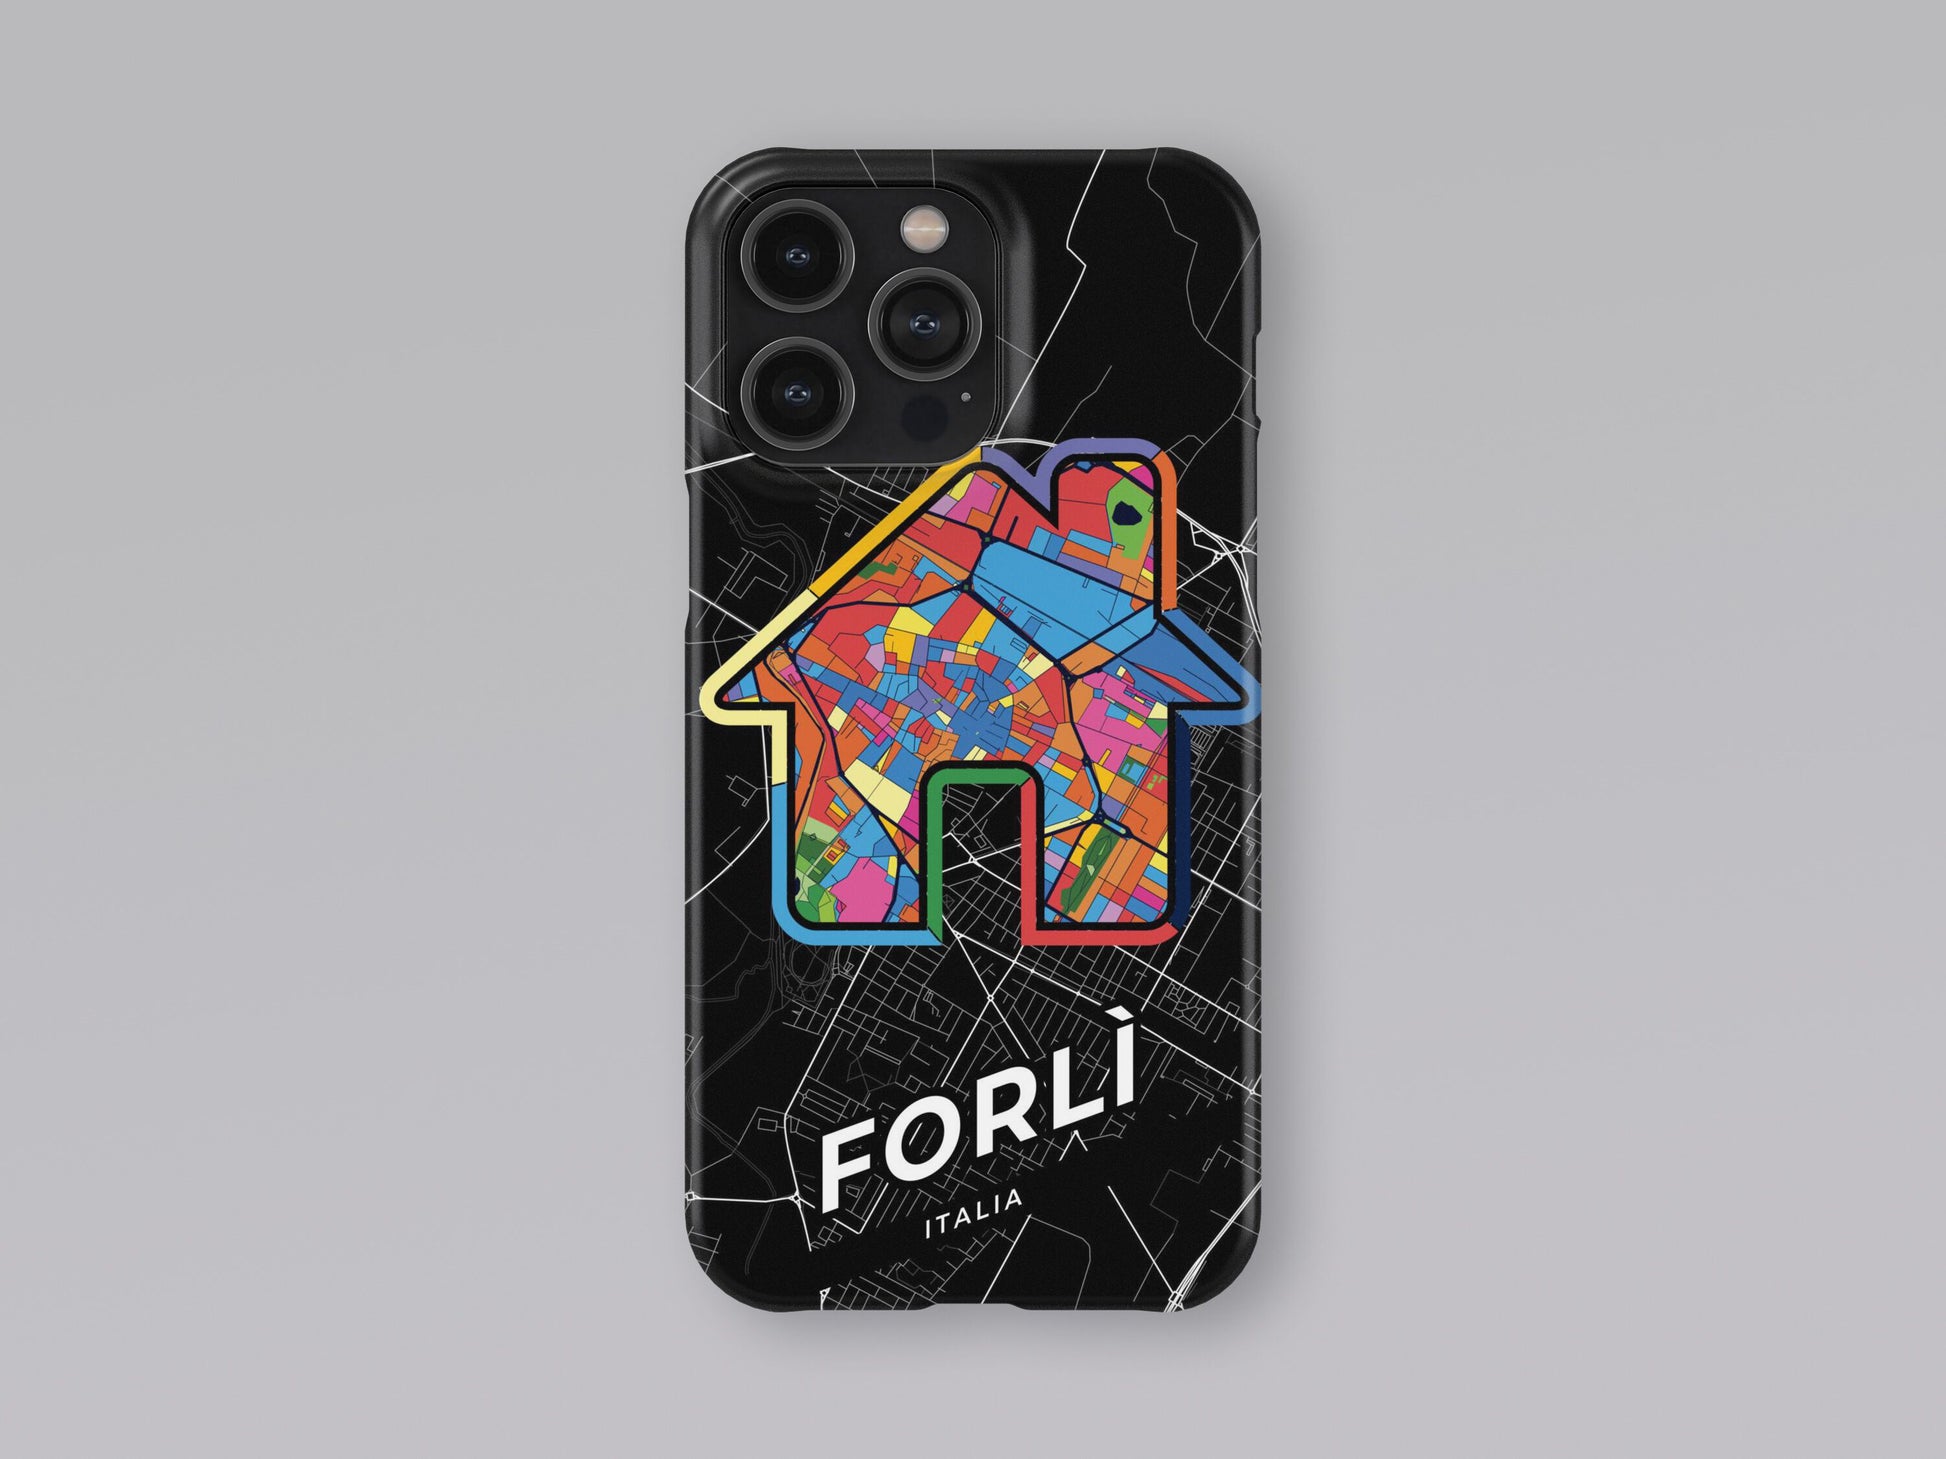 Forlì Italy slim phone case with colorful icon. Birthday, wedding or housewarming gift. Couple match cases. 3